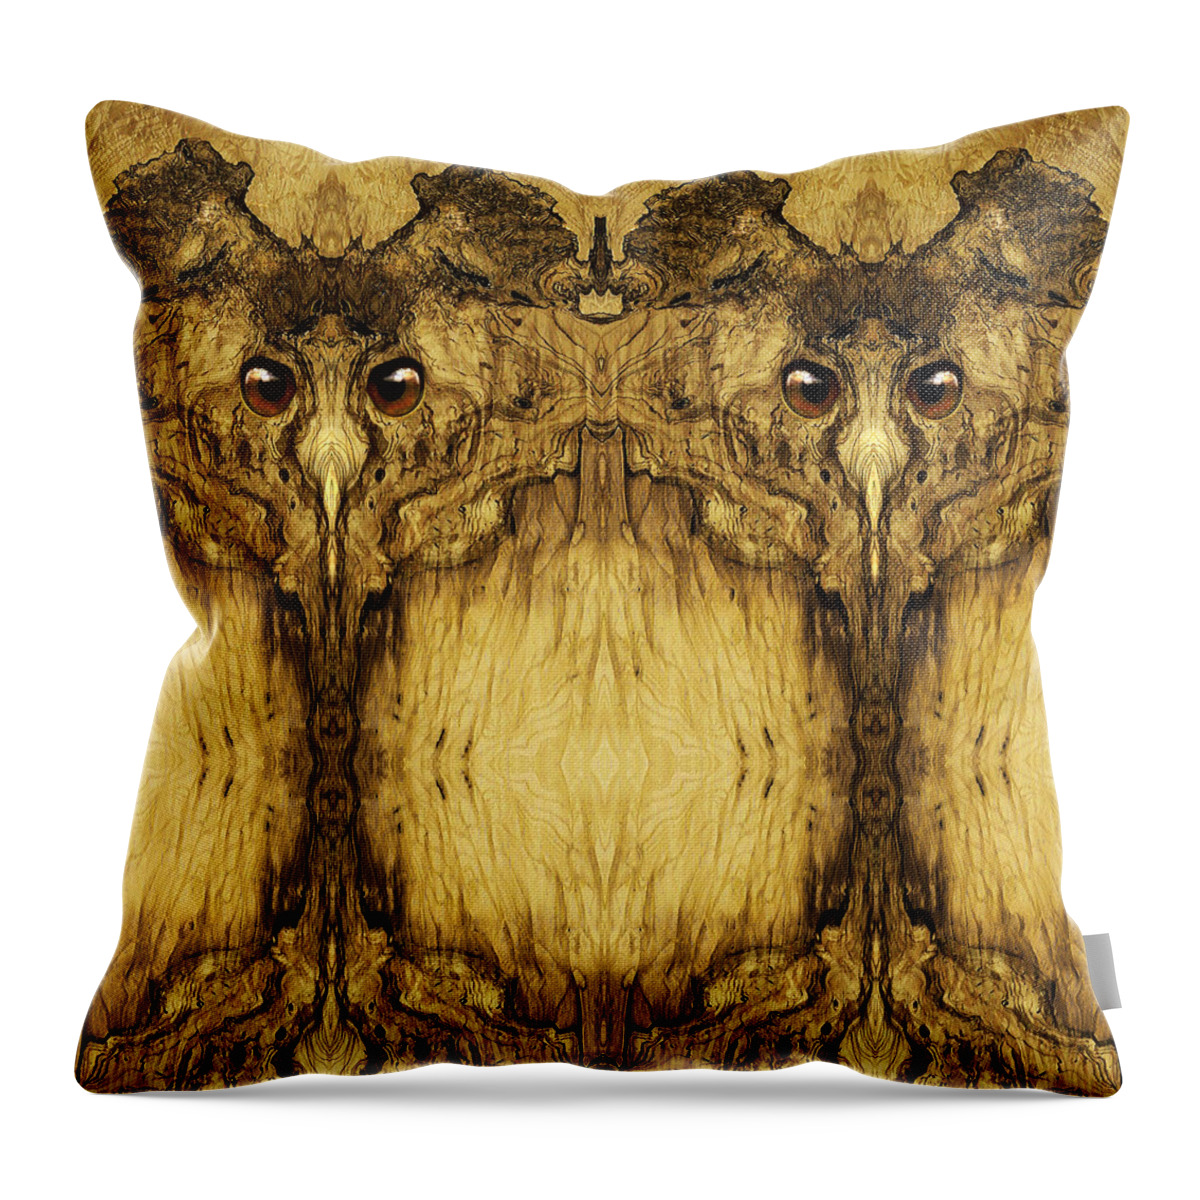 Wood Throw Pillow featuring the digital art Woody 49 by Rick Mosher